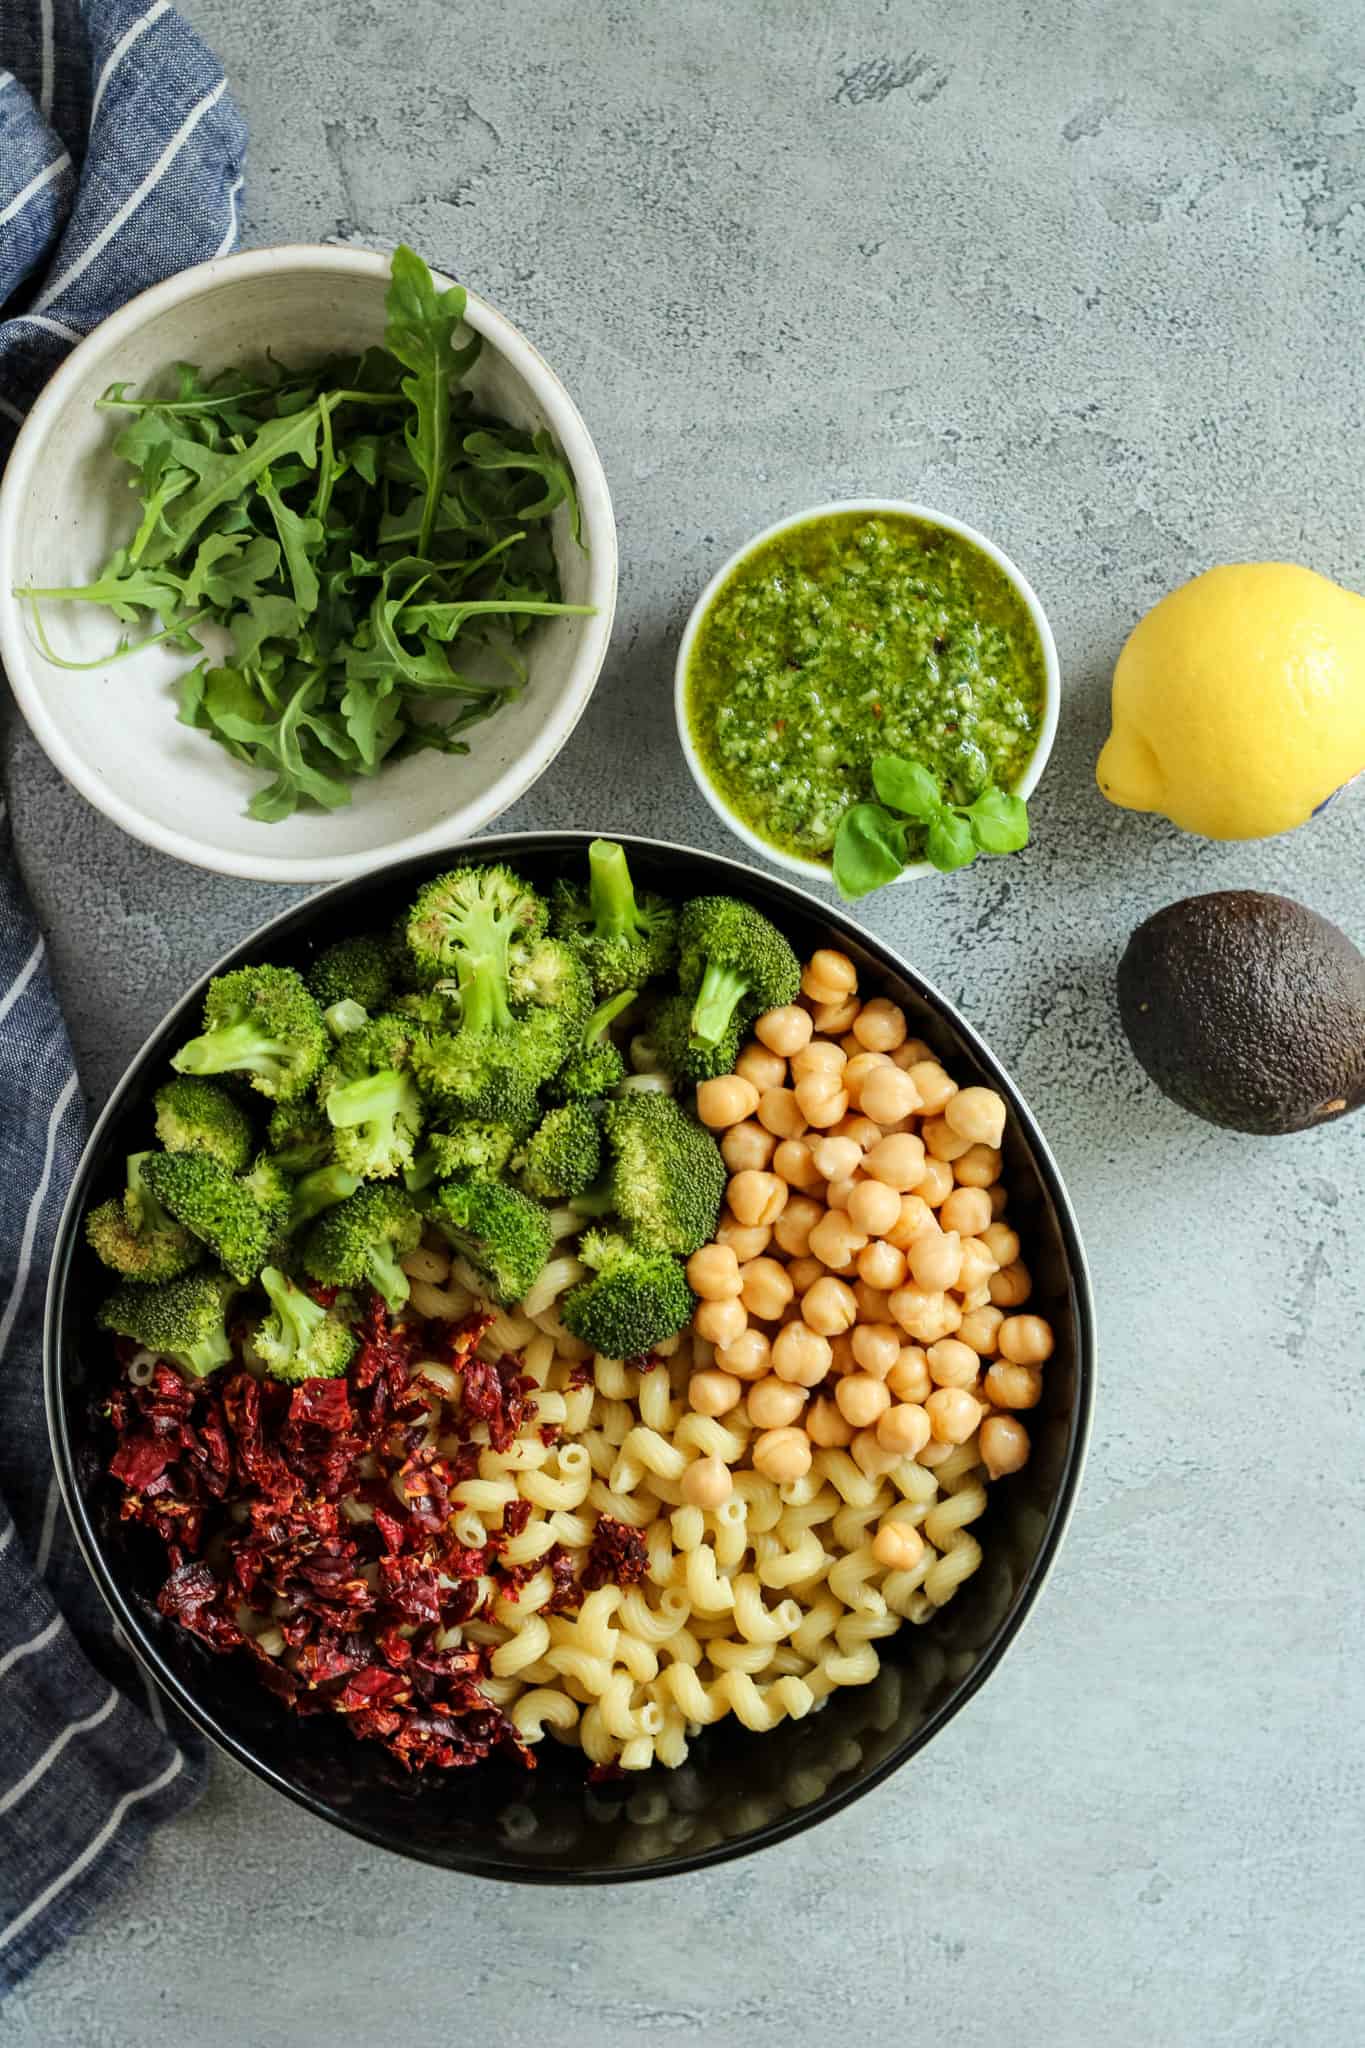 Easy Pesto Pasta Salad with Sun-Dried Tomatoes ingredients